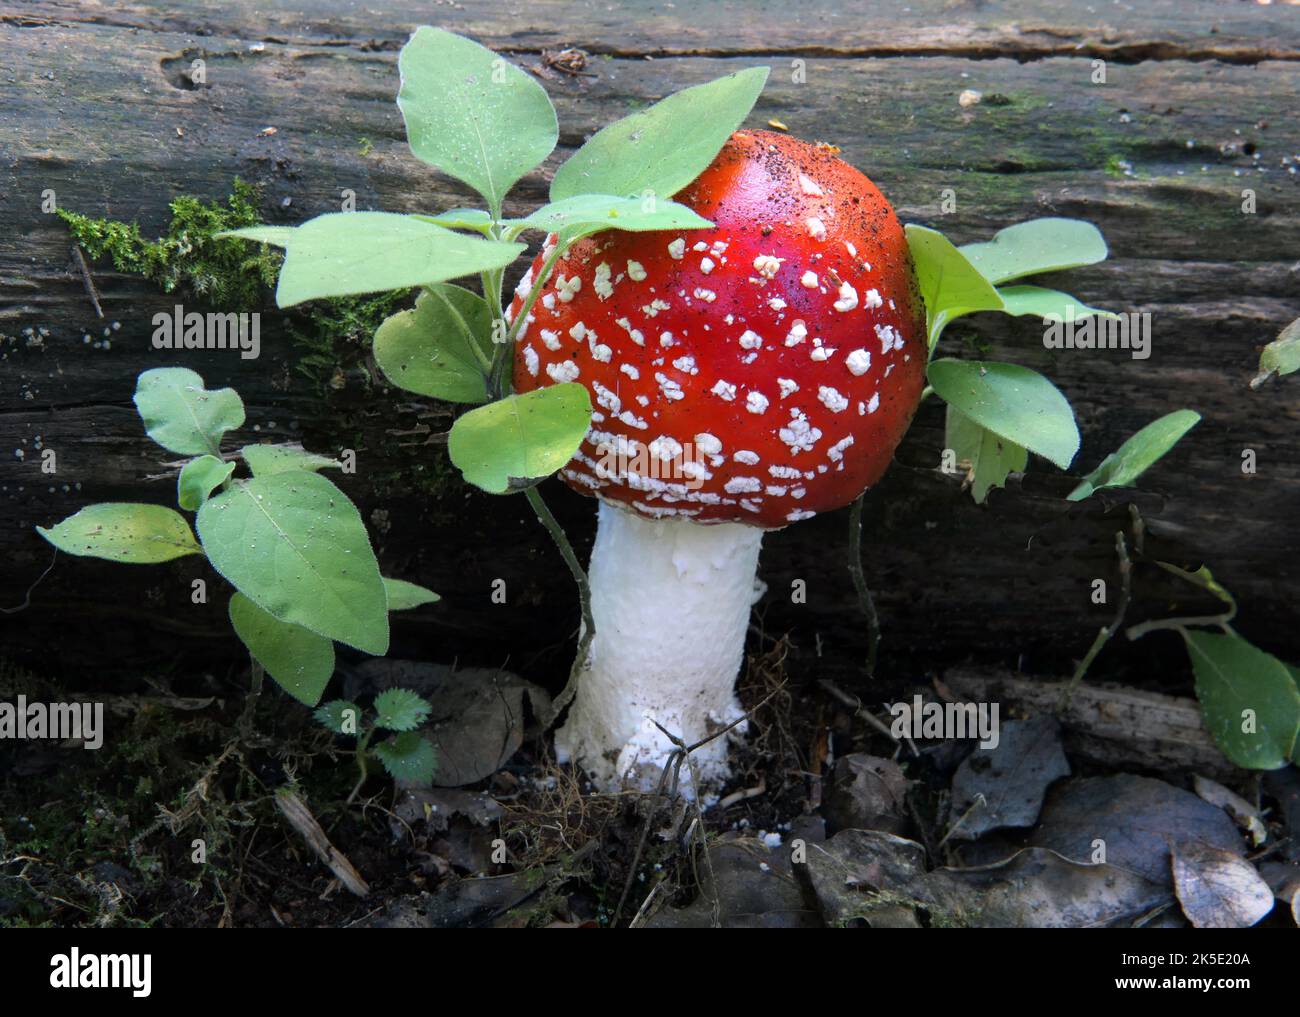 Amanita muscaria, commonly known as the fly agaric or fly amanita, is a basidiomycete of the genus Amanita. It is also a muscimol mushroom. Native throughout the temperate and boreal regions of the Northern Hemisphere, Amanita muscaria has been unintentionally introduced to many countries in the Southern Hemisphere, generally as a symbiont with pine and birch plantations, and is now a true cosmopolitan species. It associates with various deciduous and coniferous trees. Although poisonous, death due to poisoning from A. muscaria ingestion is quite rare. Credit: BSpragg Stock Photo